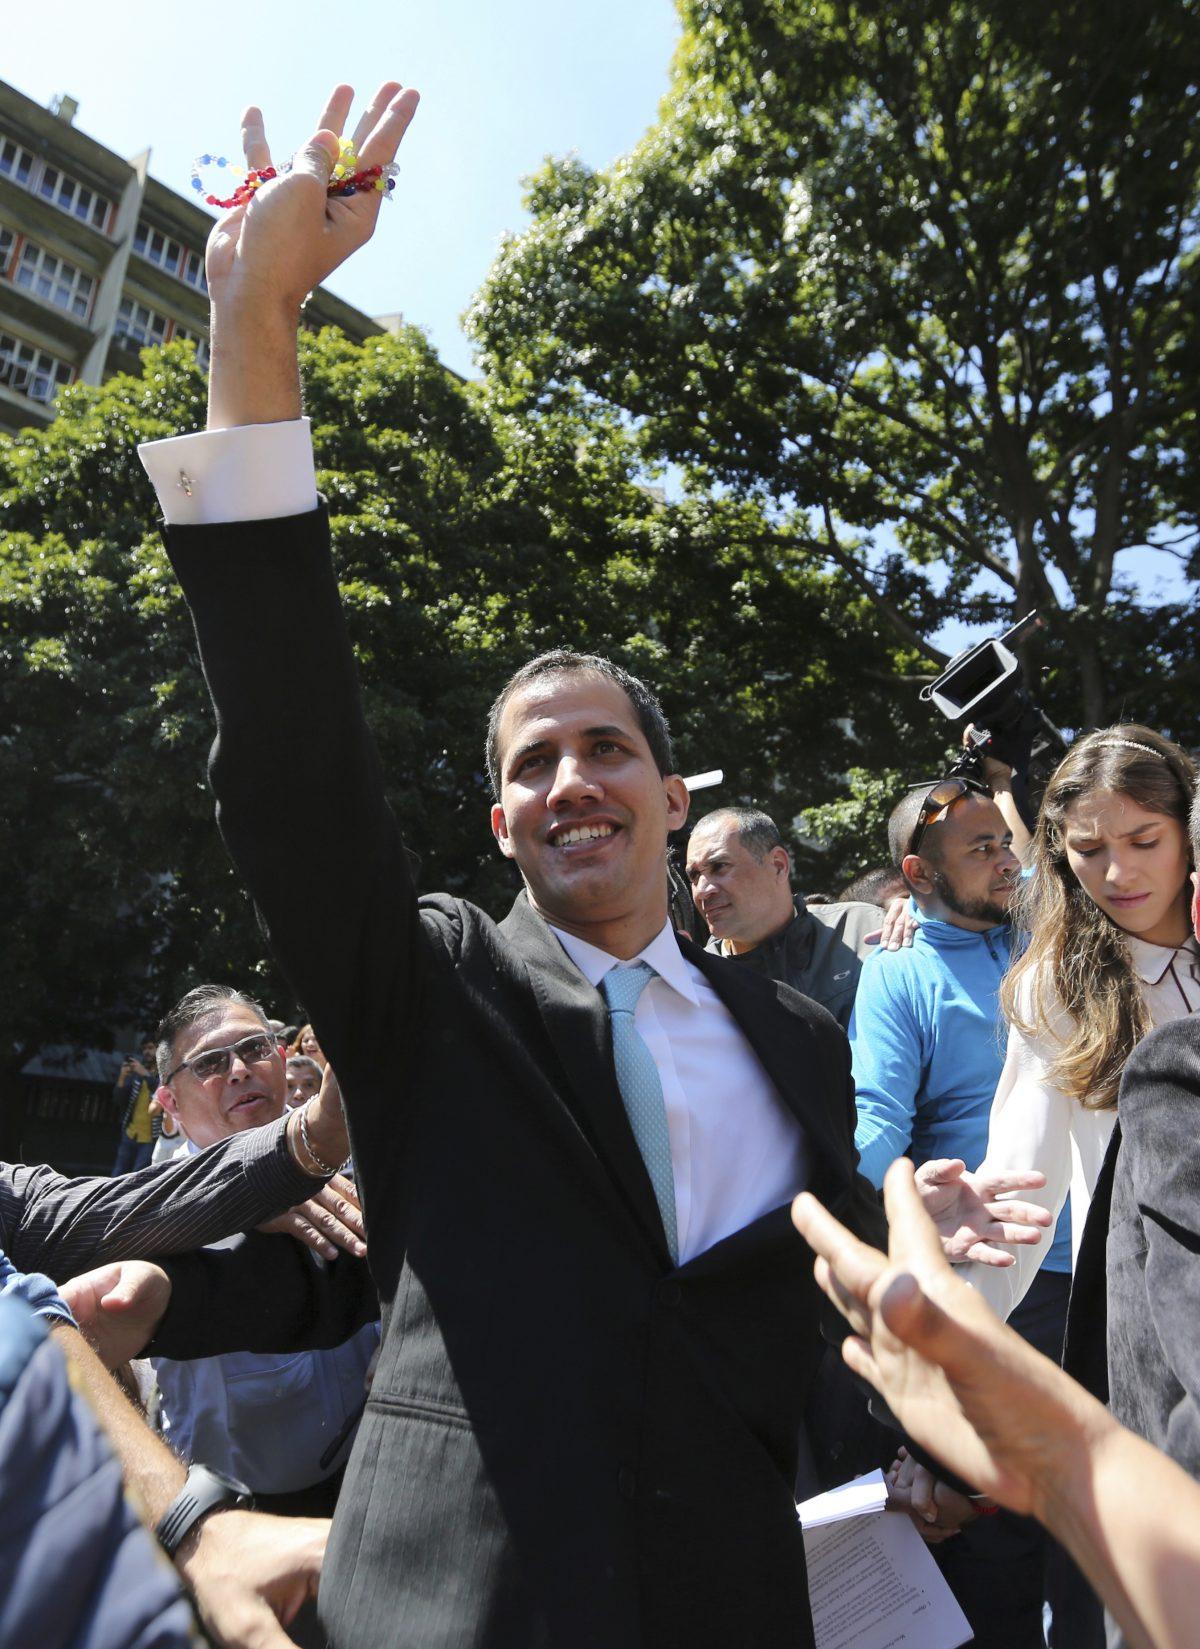 Opposition National Assembly President Juan Guaido greets supporters upon his arrival to the Venezuelan Central University for a conference on economic plans for reviving the country in Caracas, Venezuela, Jan. 31, 2019. An independent U.N. human rights monitor says economic sanctions are compounding a "grave crisis" in Venezuela. (AP/Fernando Llano)